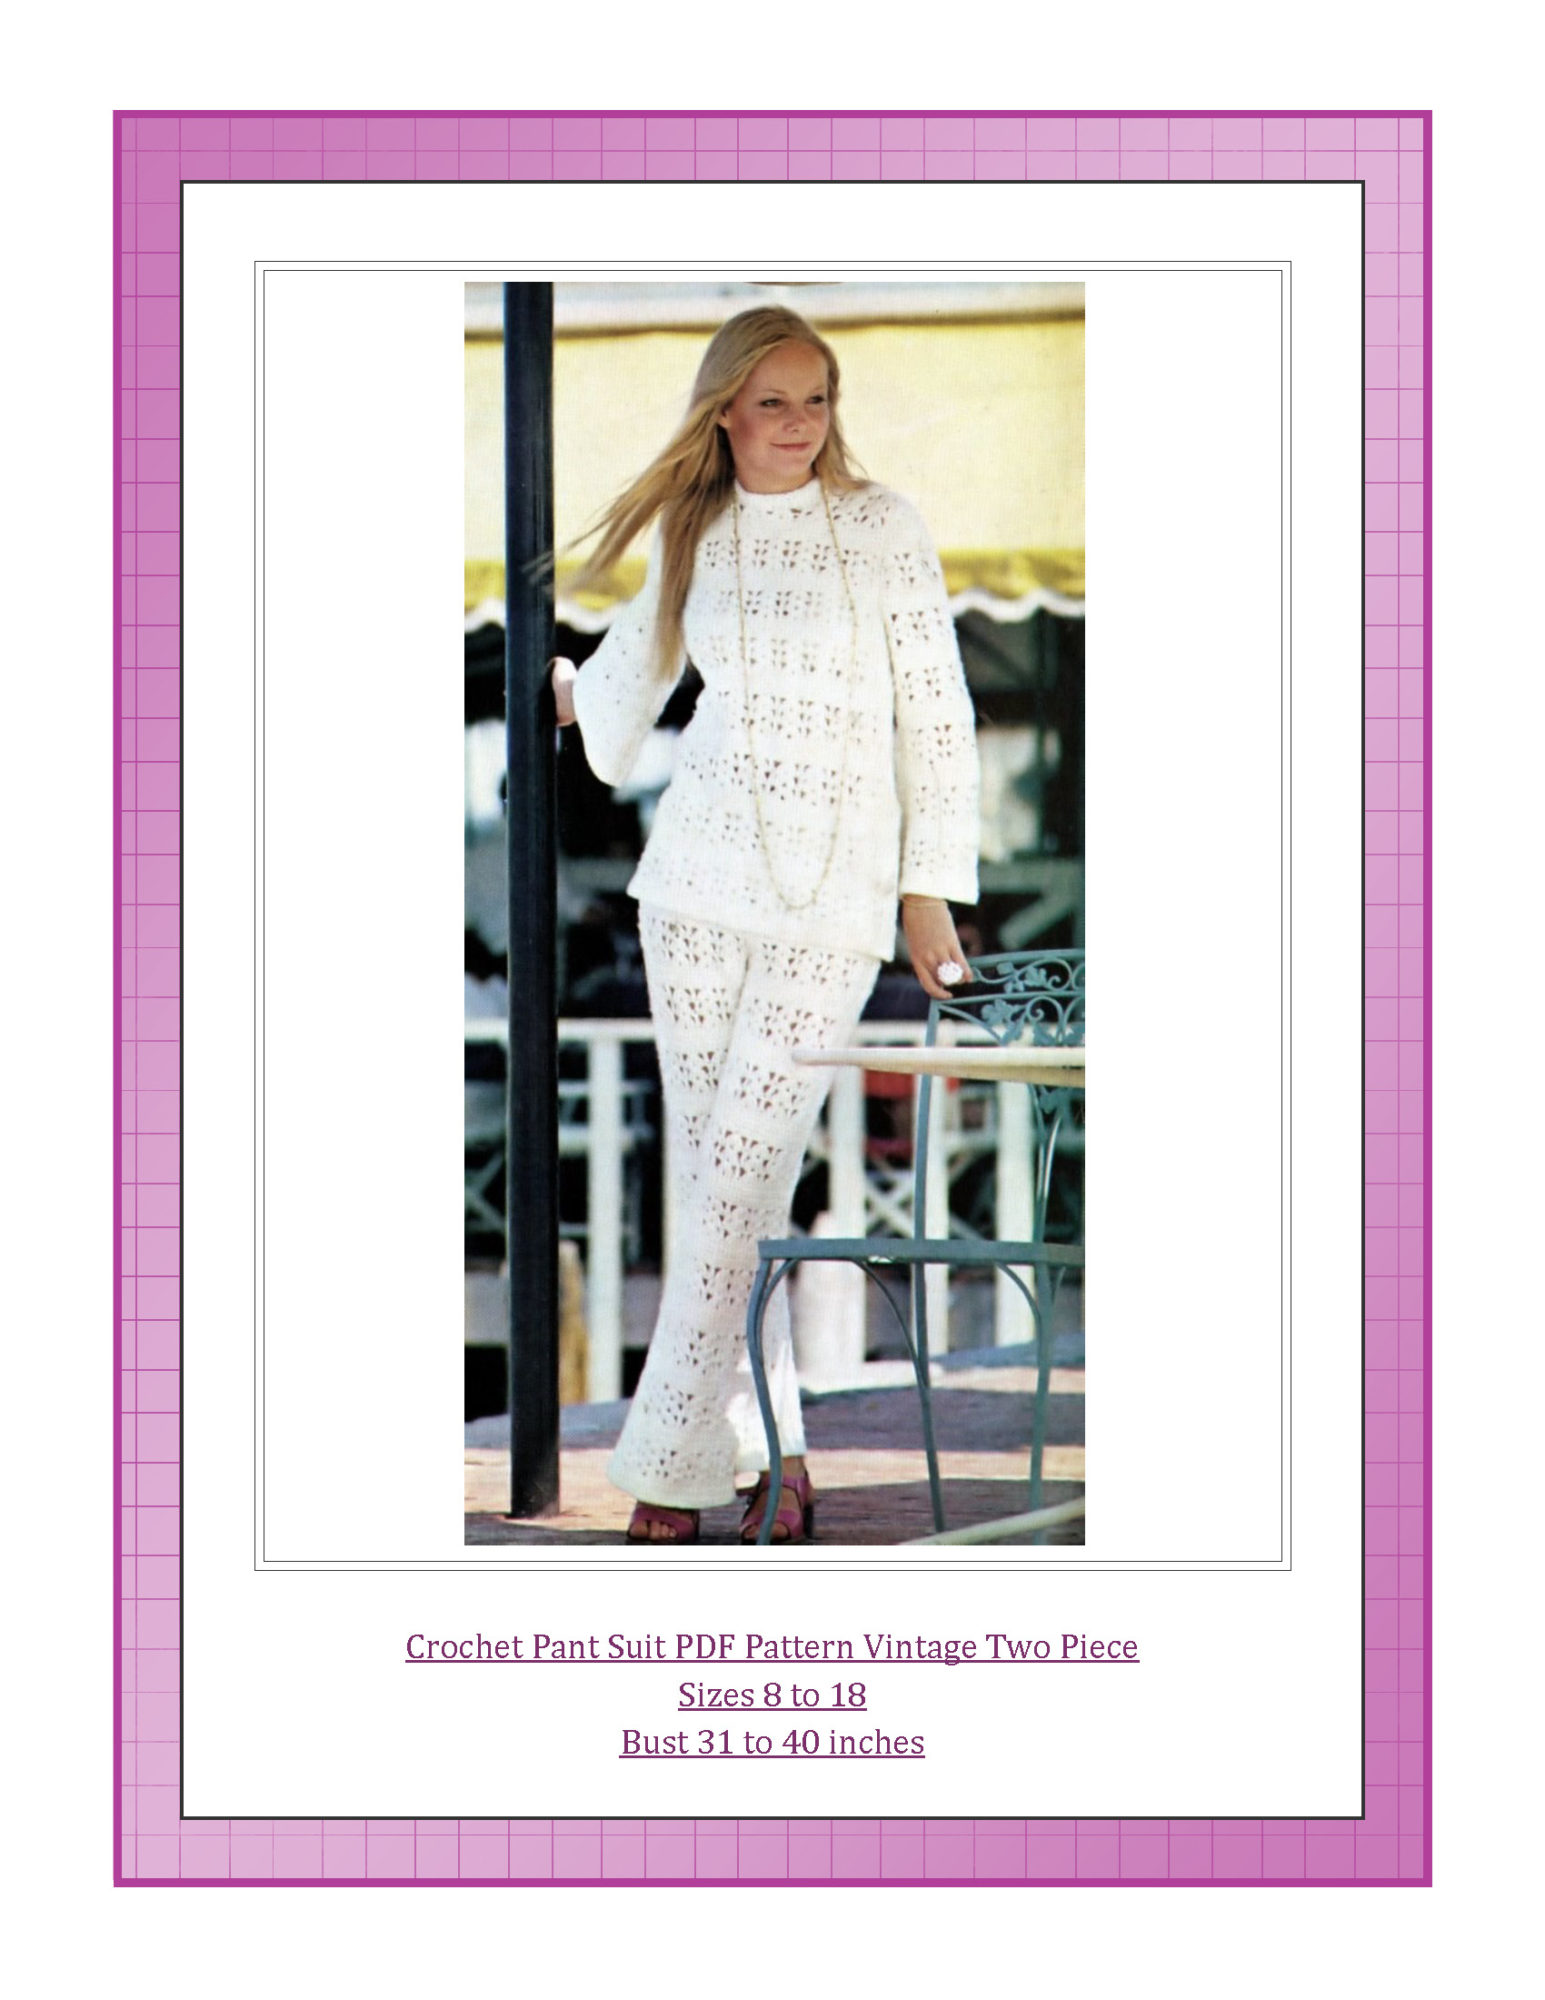 Crochet Pant Suit PDF Pattern Vintage Two Piece Sizes 8 to 18 Bust 31 to 40 inches